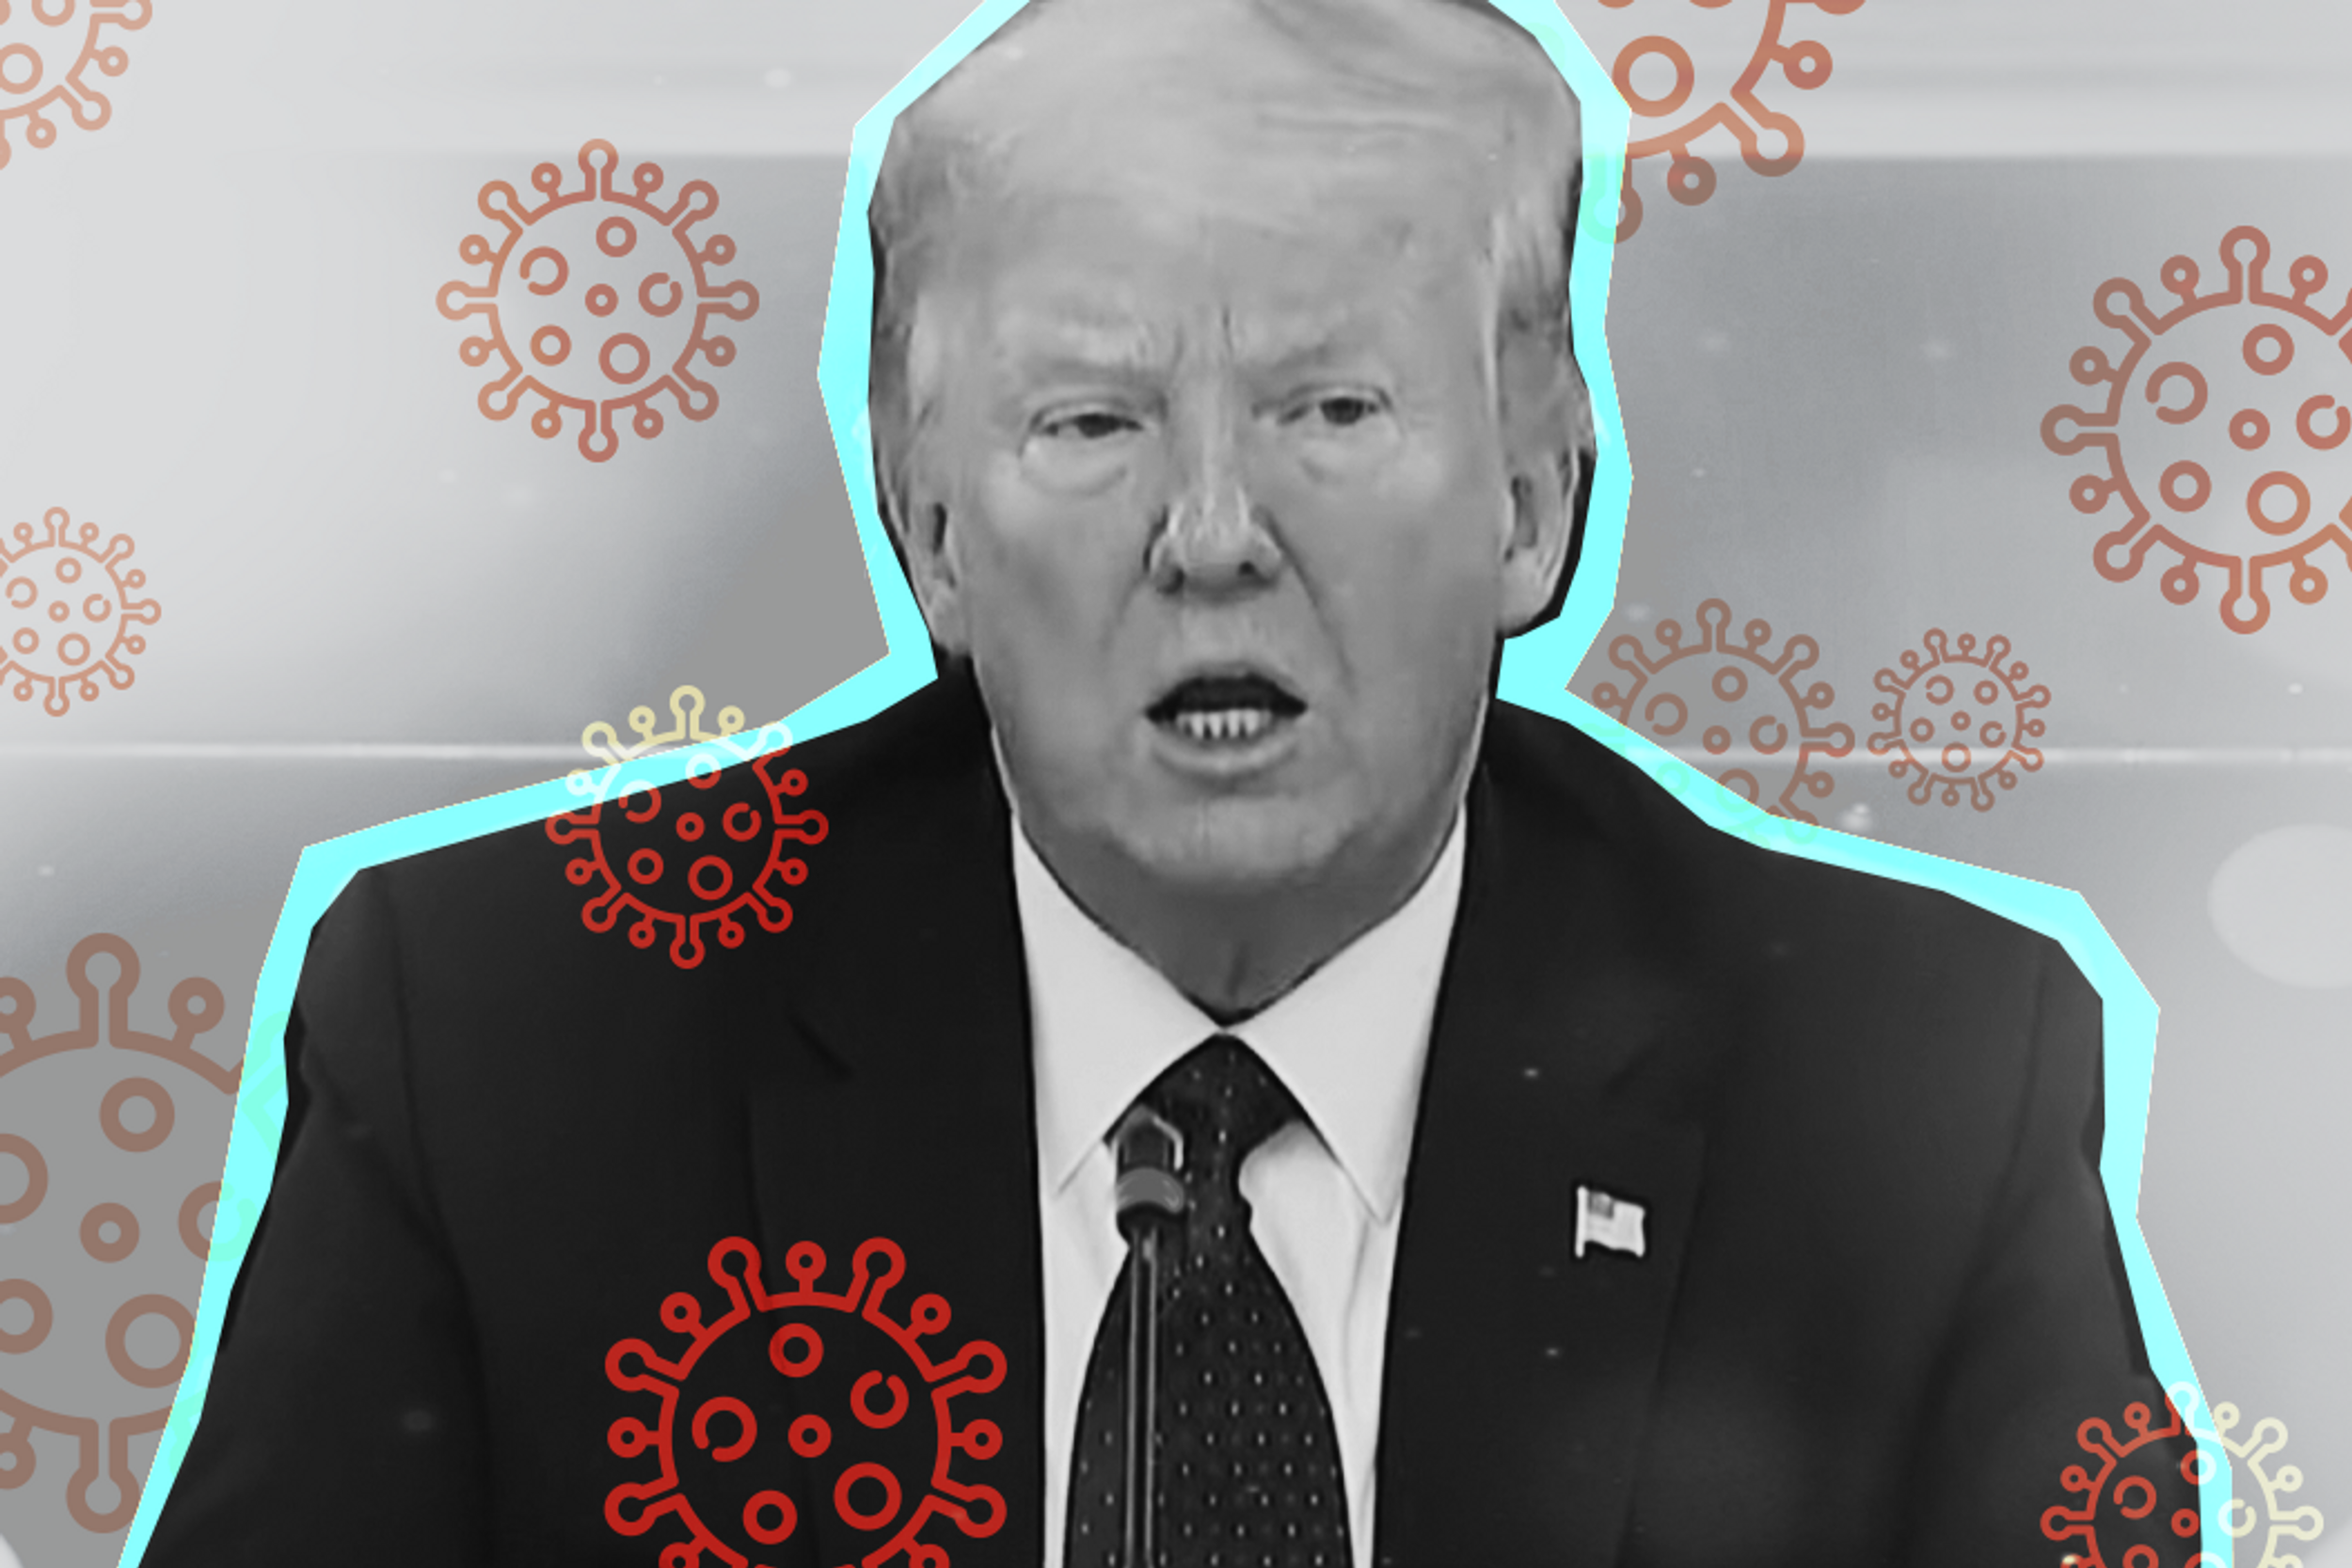 President Donald Trump surrounded by images of the coronavirus 